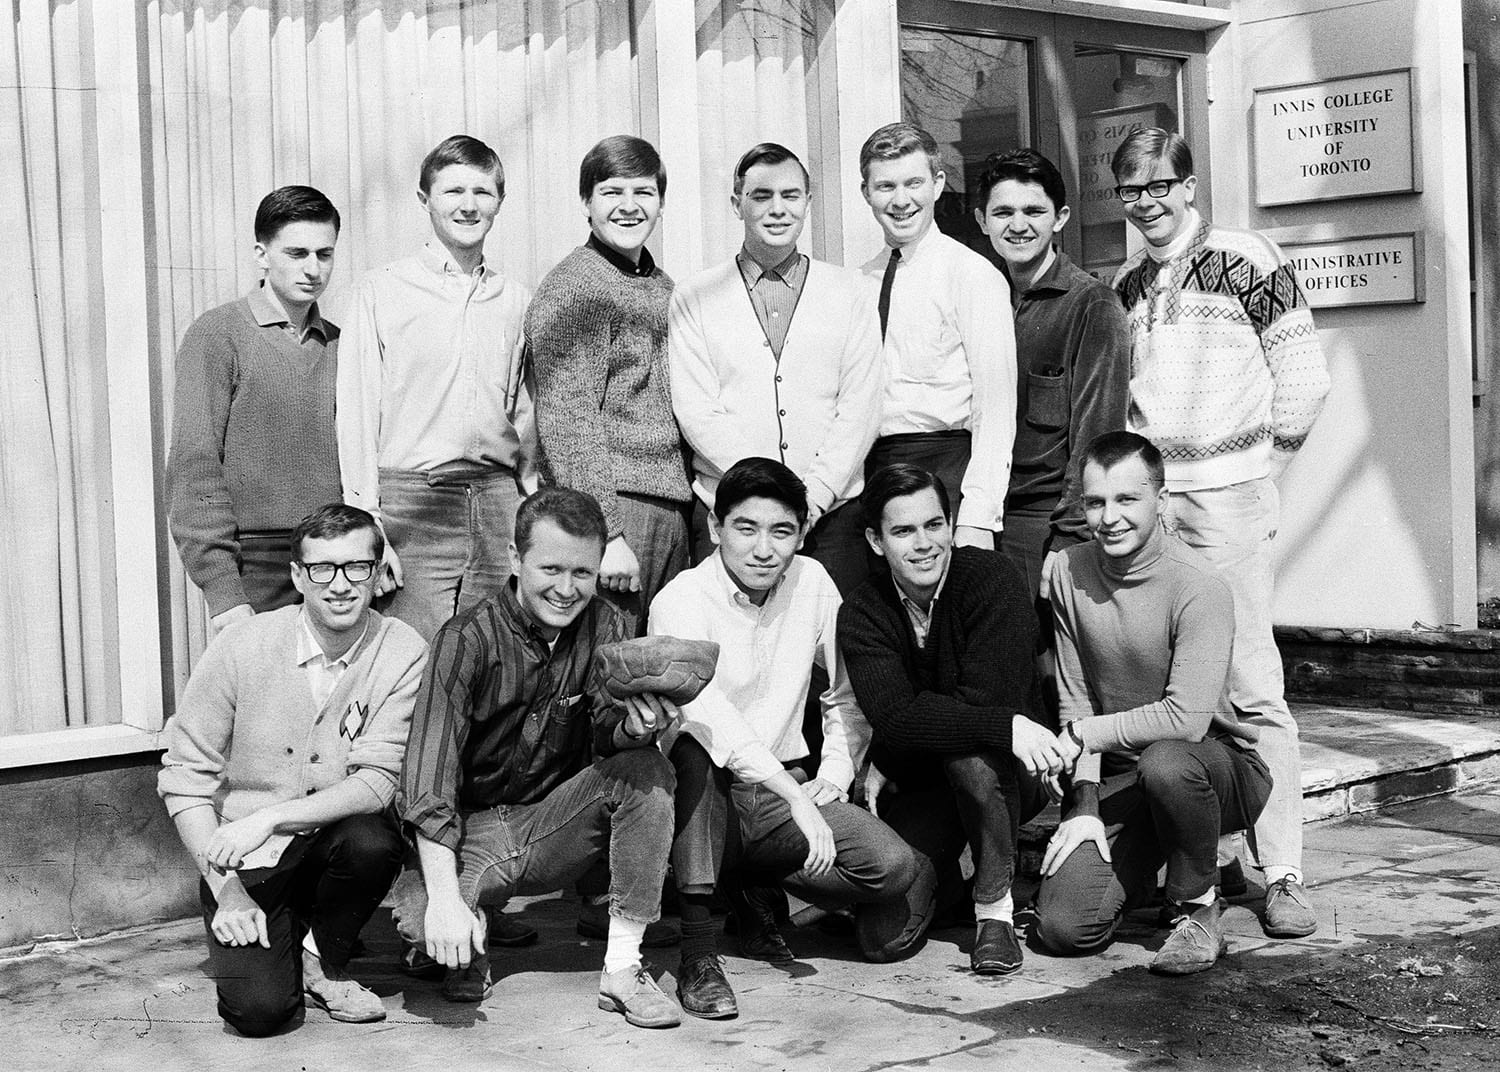 Men's Soccer team posing for a photo outside the Innis College Administrative Offices. One man is holding a deflated soccer ball.